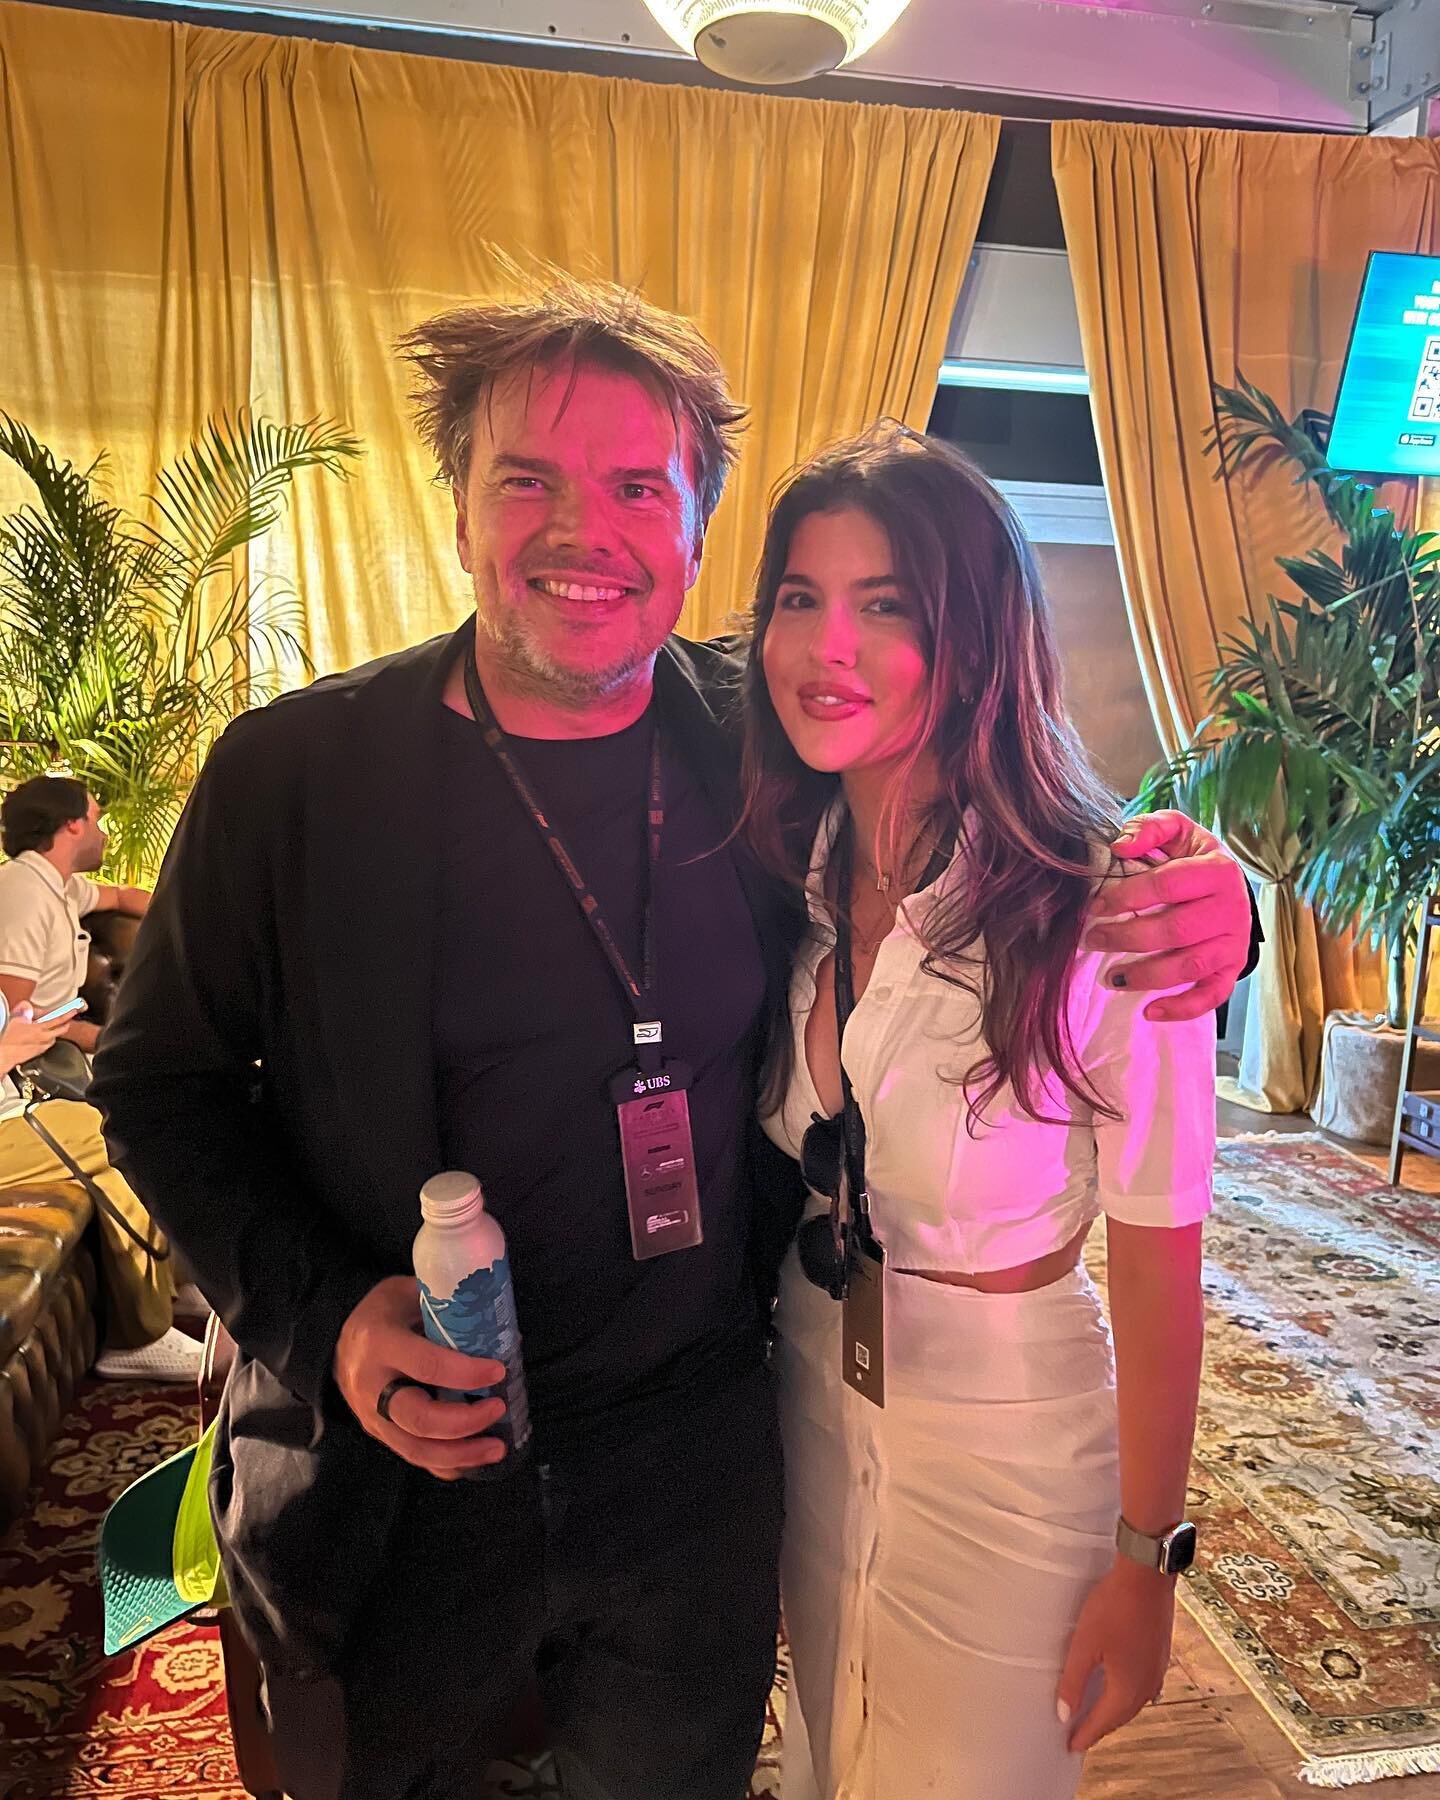 🏎️🏢 A meeting of architectural minds at the Miami Formula 1 race! Up and coming architect, Amanda Bonvecchio, had the honor of meeting the world-renowned architect Bjarke Ingels, founder of BIG. 🌍🌿

Miami has become a hub for modern architecture,